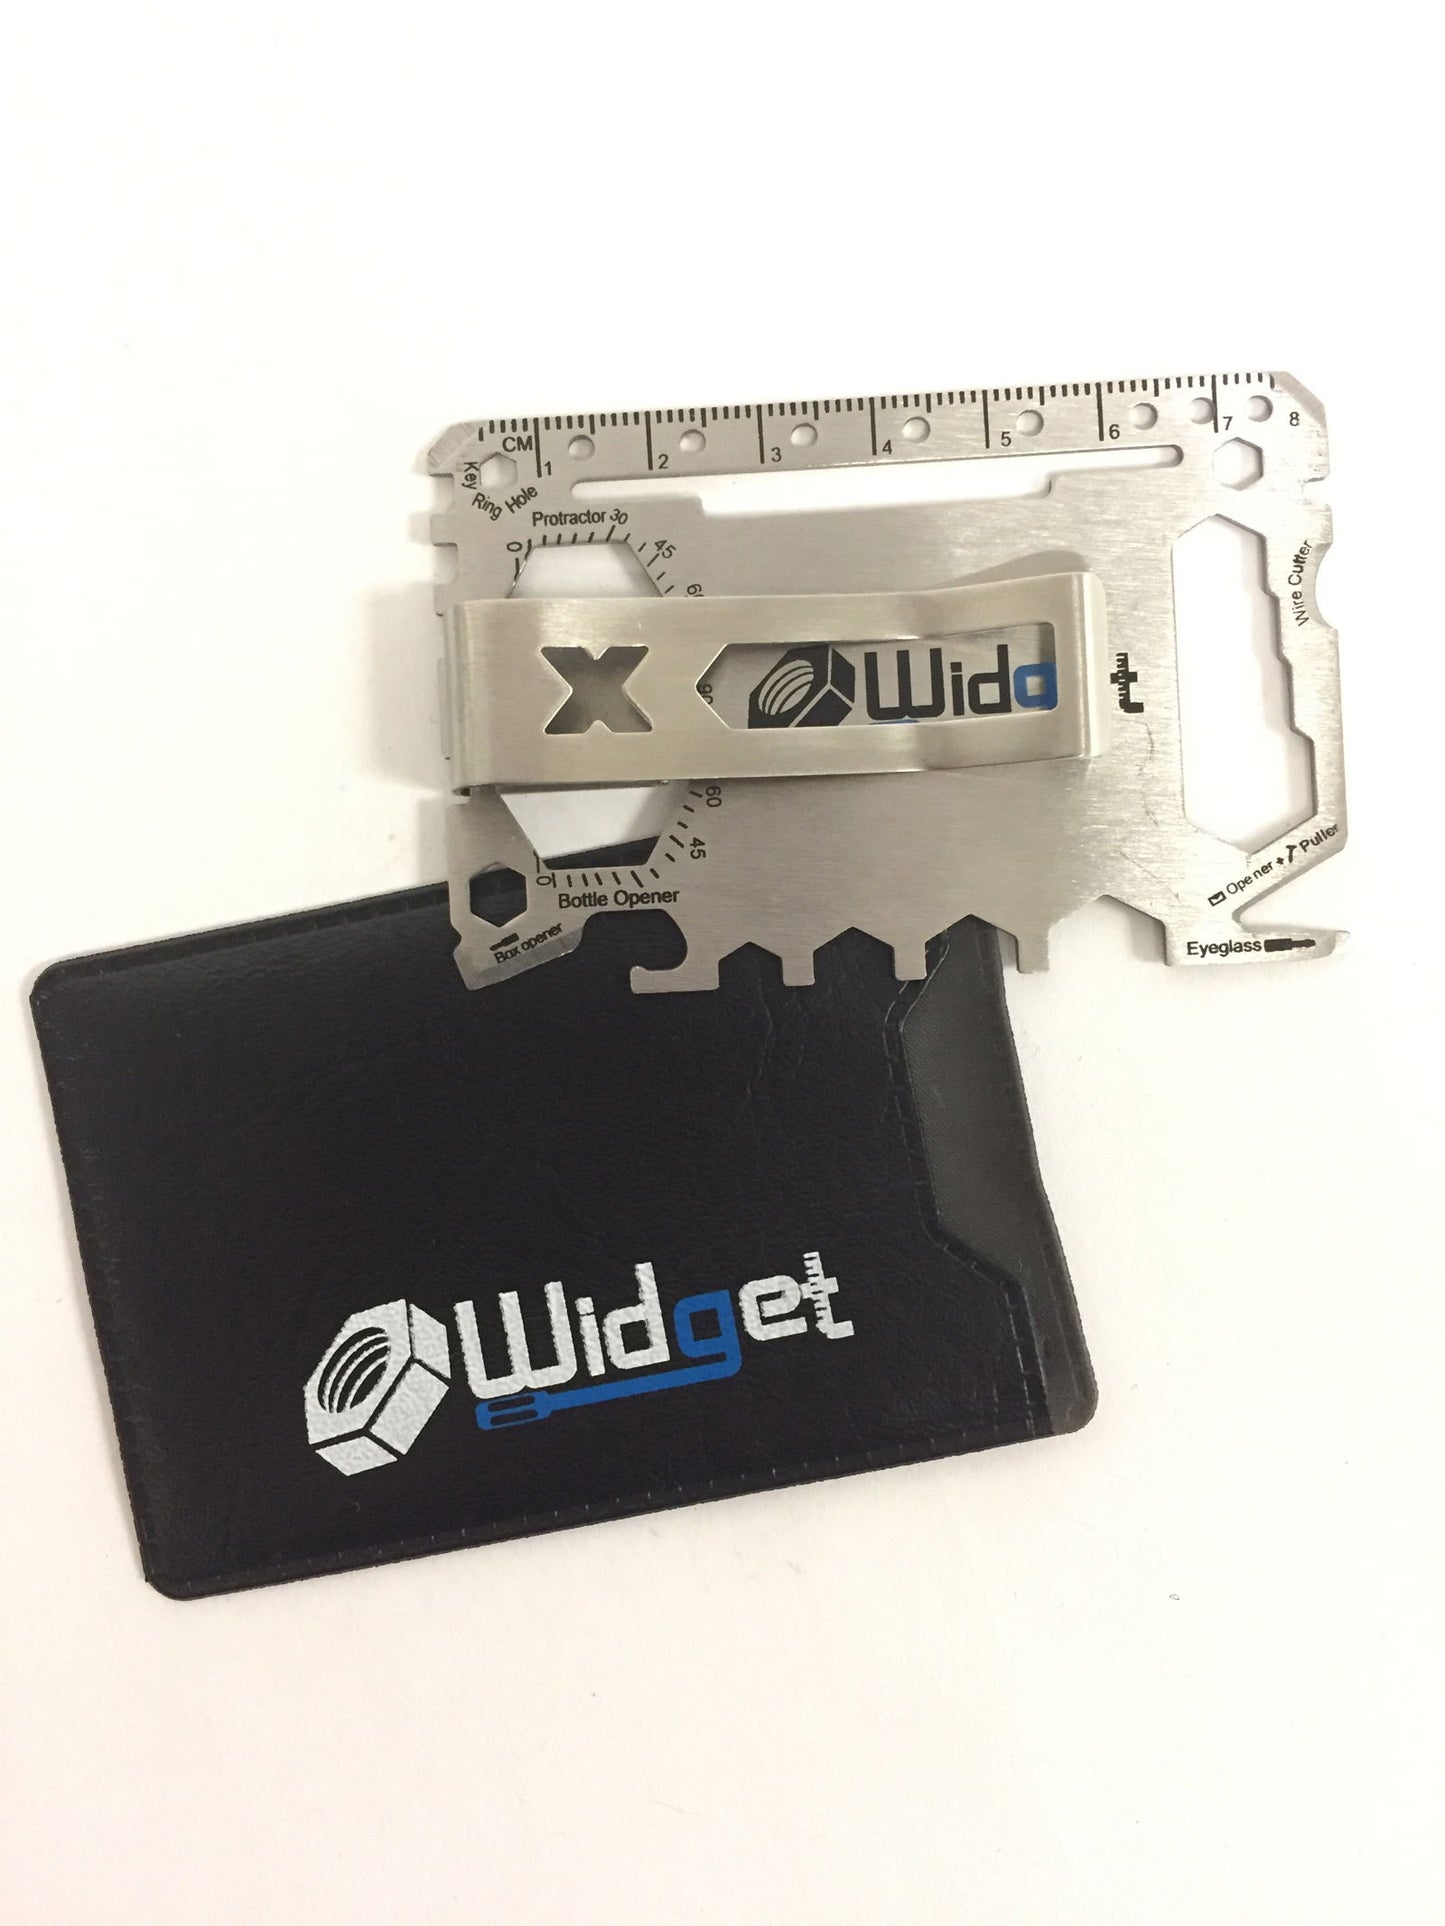 The WIDGET (43-in-1 Credit Card Size Multi-tool) - W4W Products 